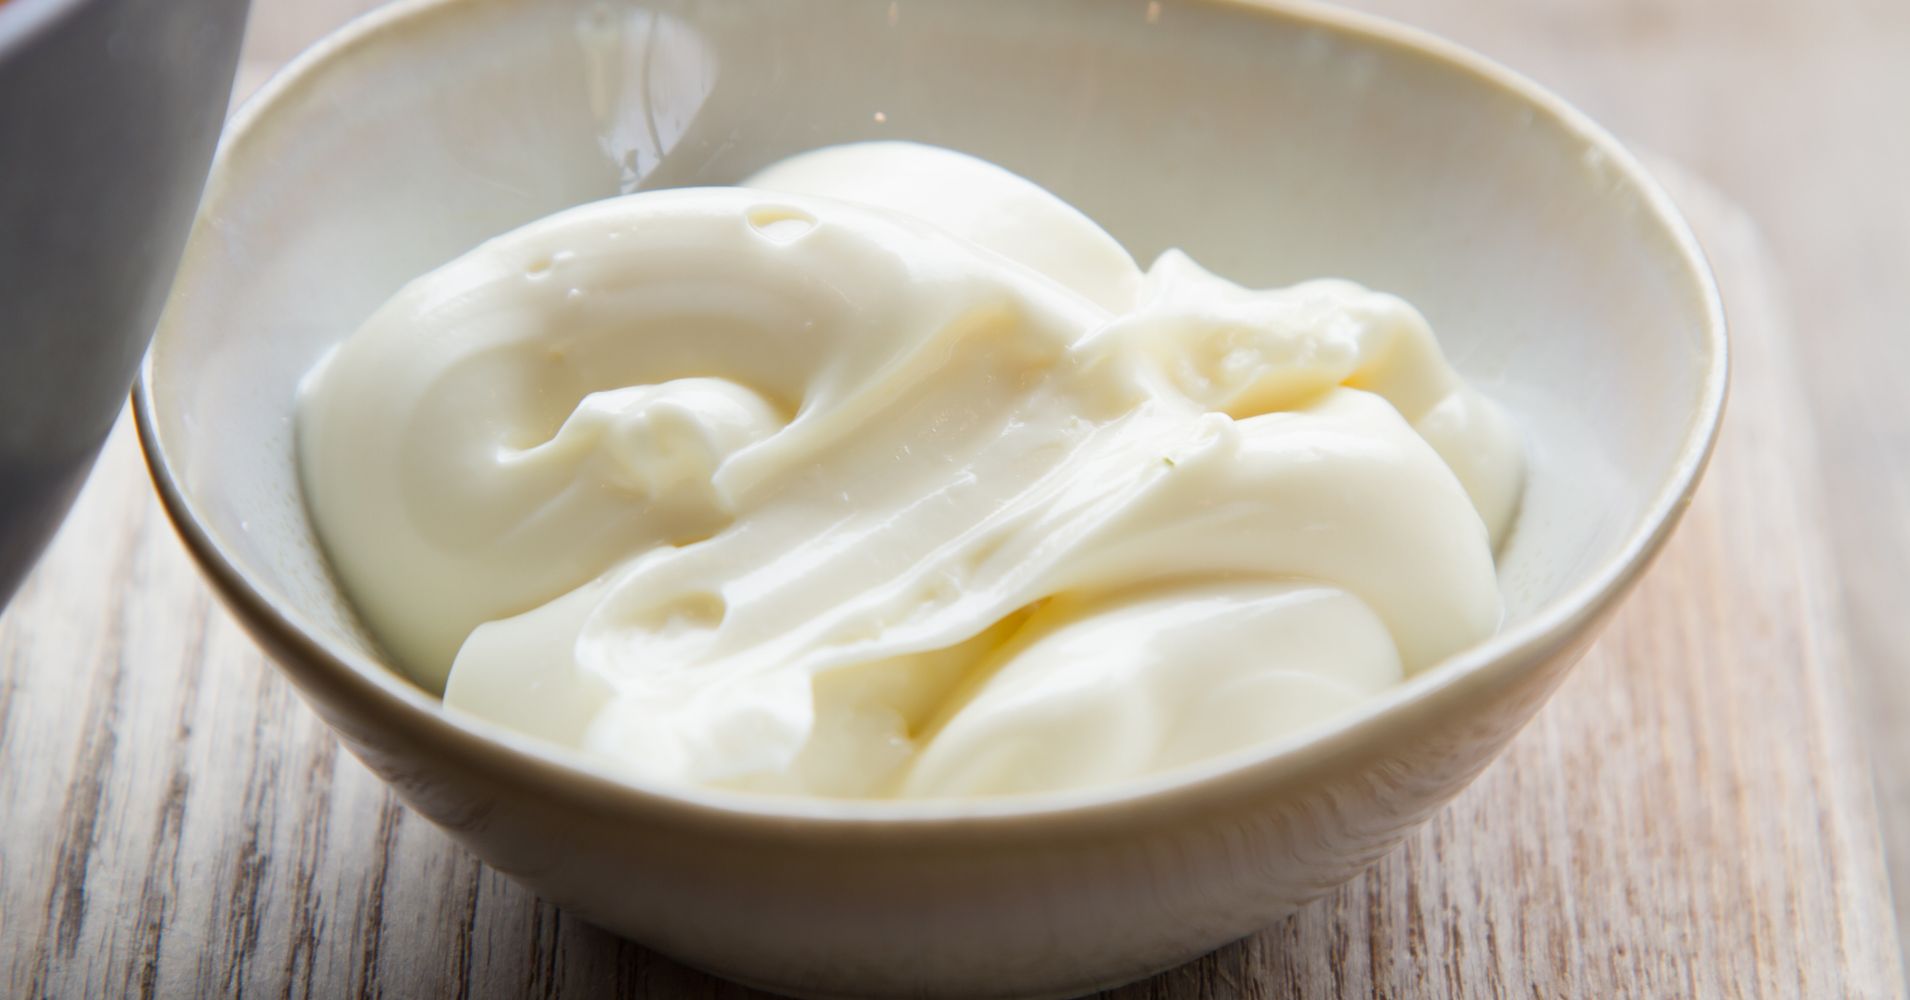 Experts Explain Why People Are Disgusted By Mayonnaise | HuffPost1910 x 1000